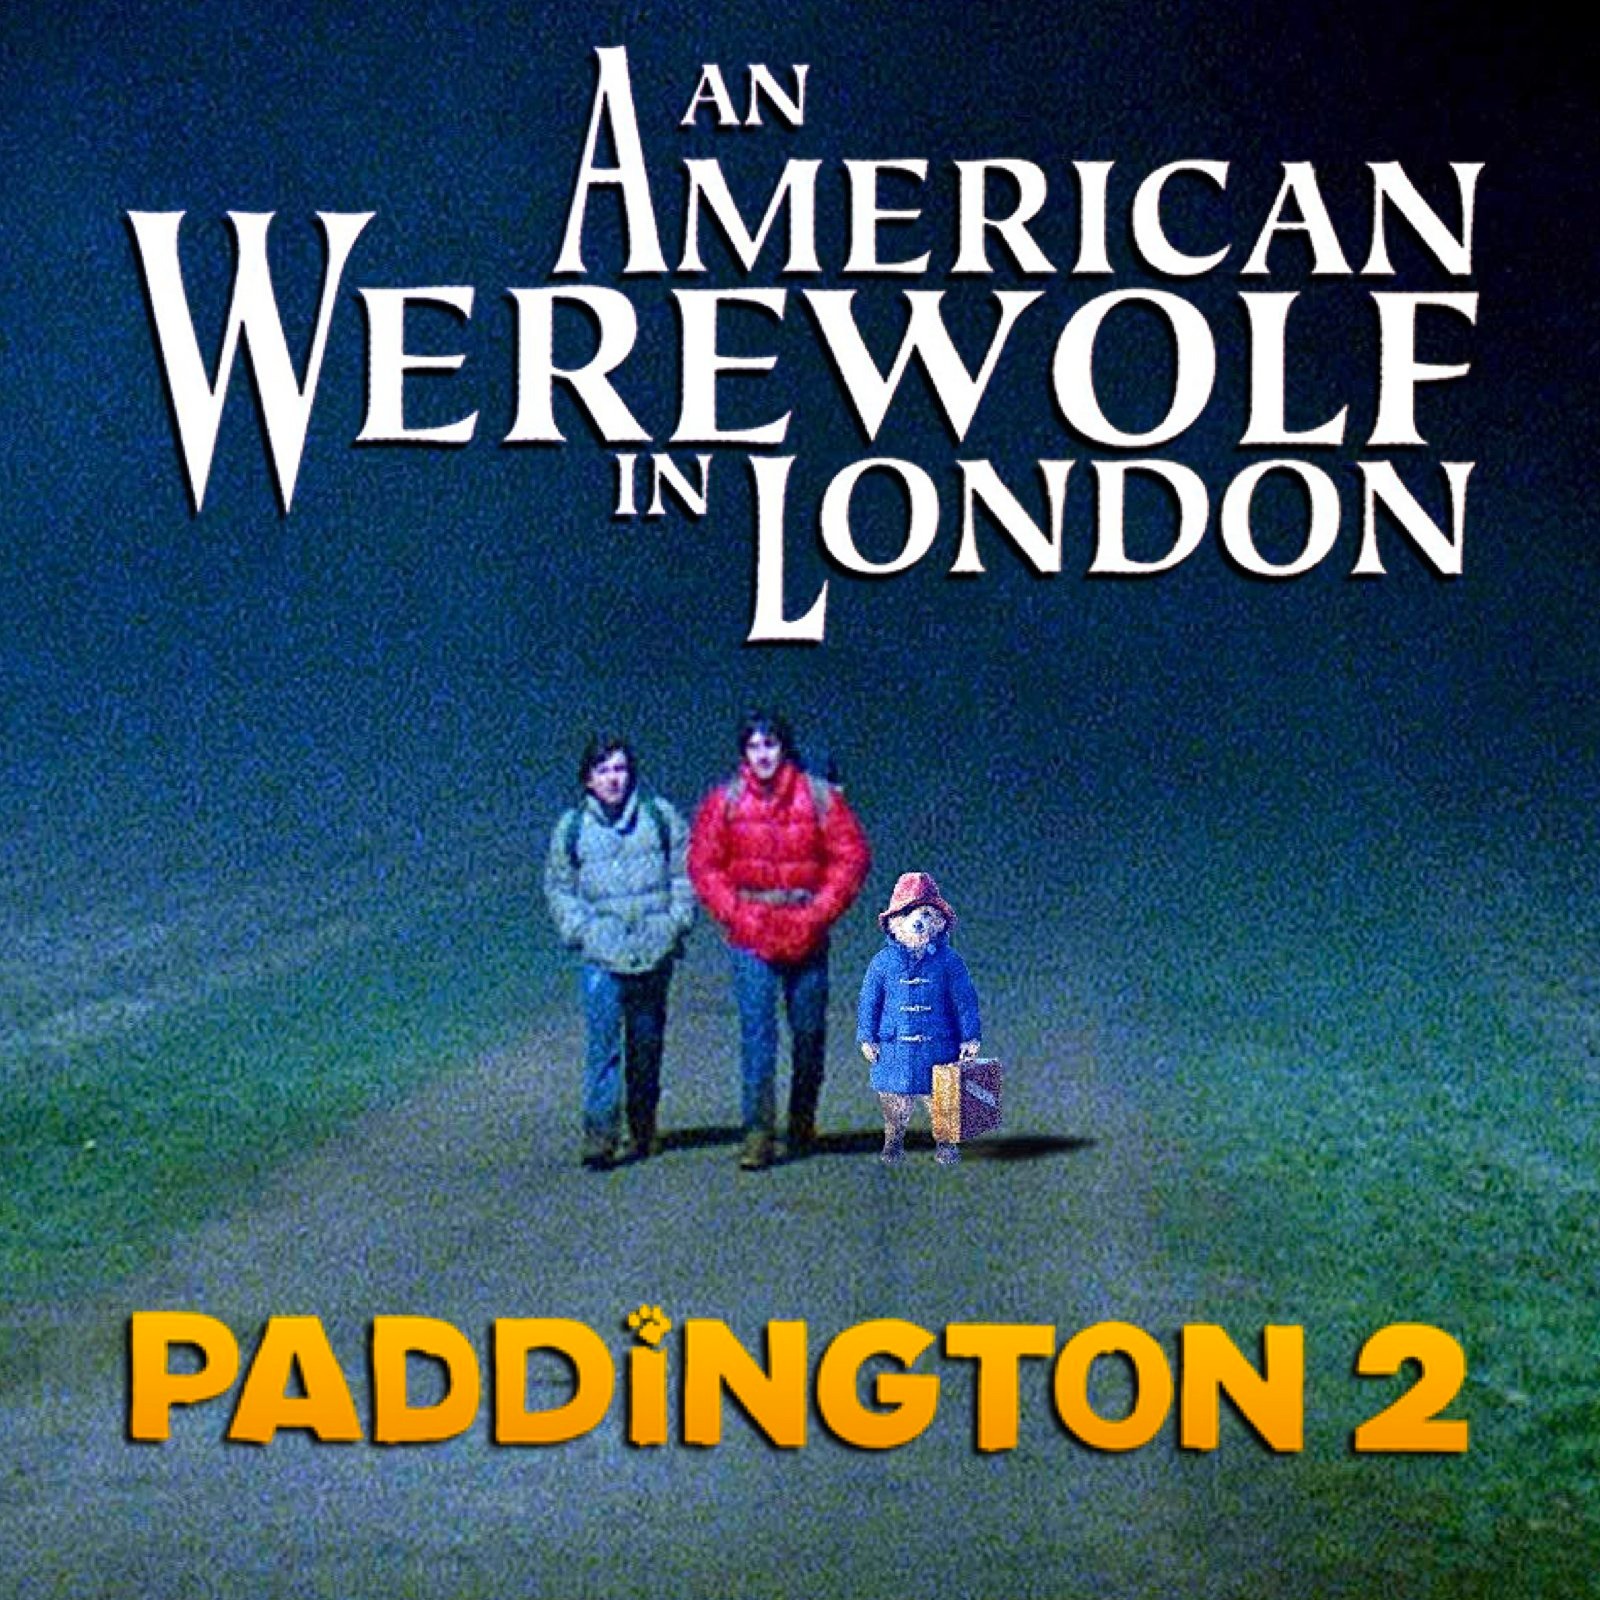 Second Rate Review: An American Werewolf in London / Paddington 2